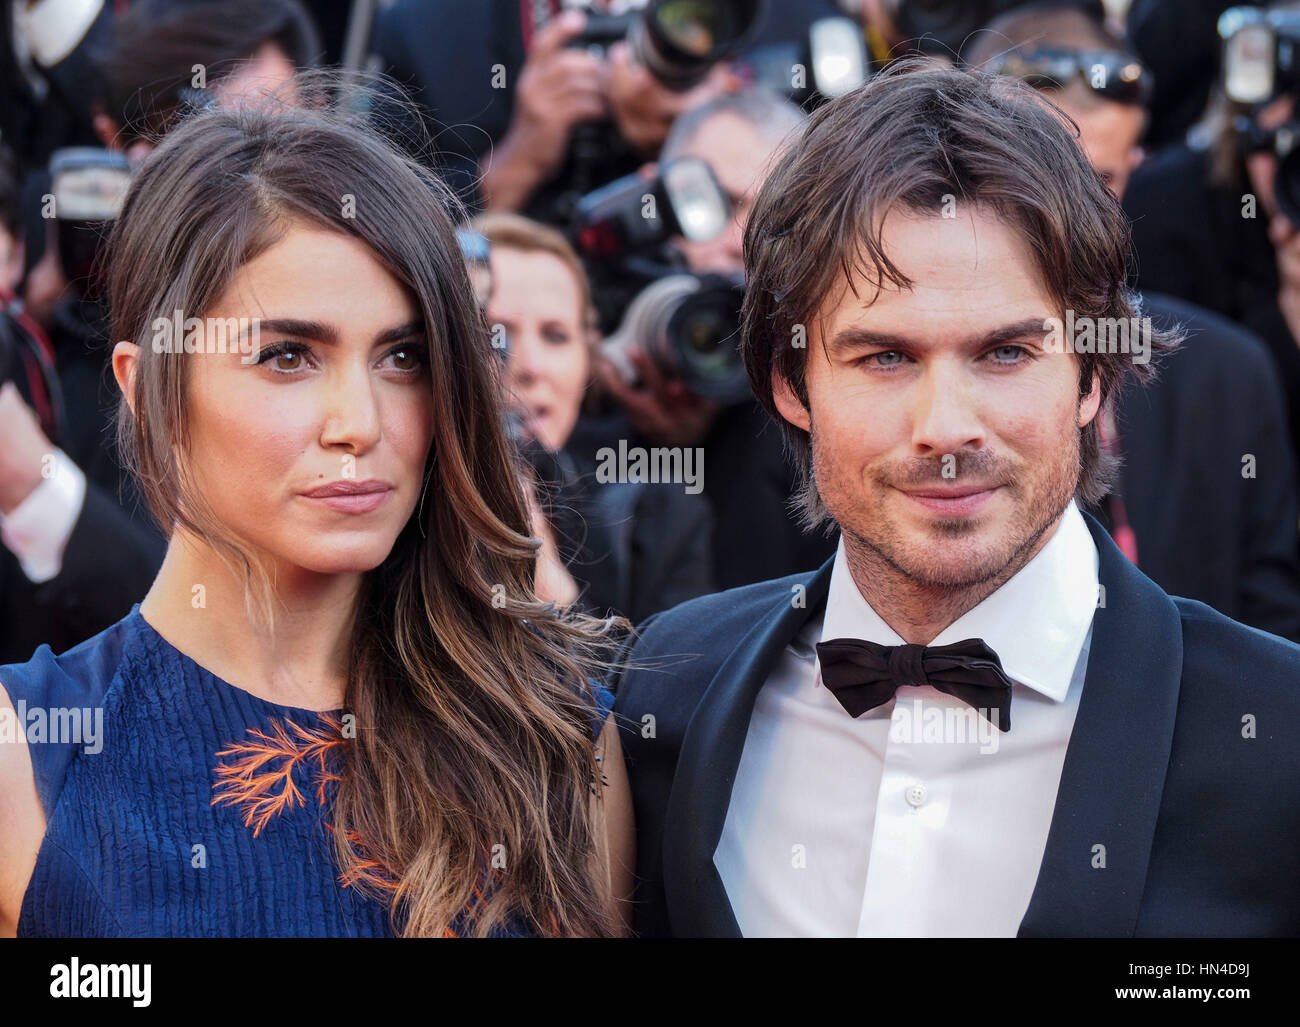 Nikki Reed and Ian Somerhalder arrive at the premiere for the film, 'Youth' at the 68th Cannes Film Festival on May 20, 2015 in Cannes, France.  Photo by Francis Specker Stock Photo